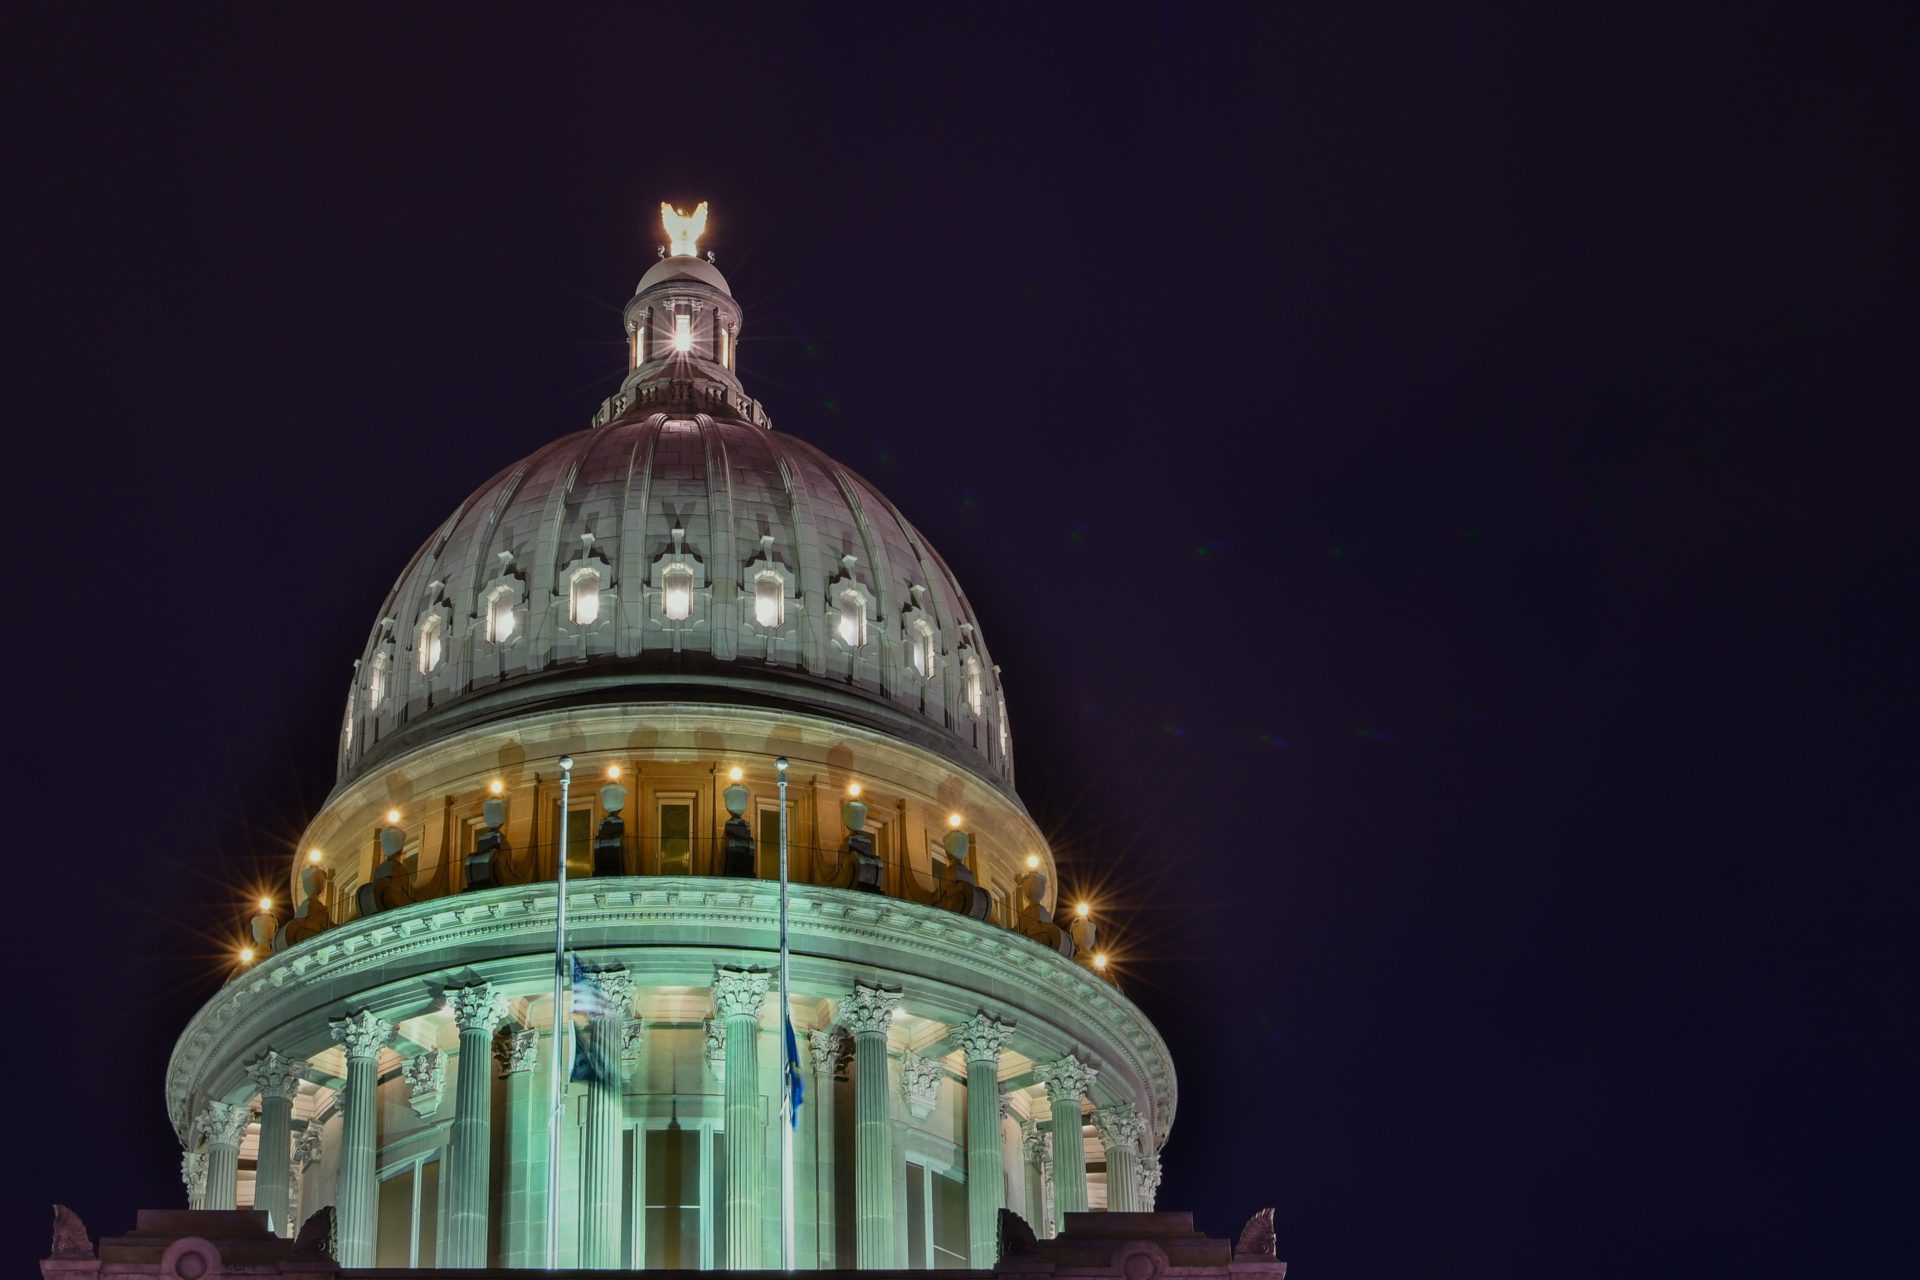 Top of the capitol building at night.